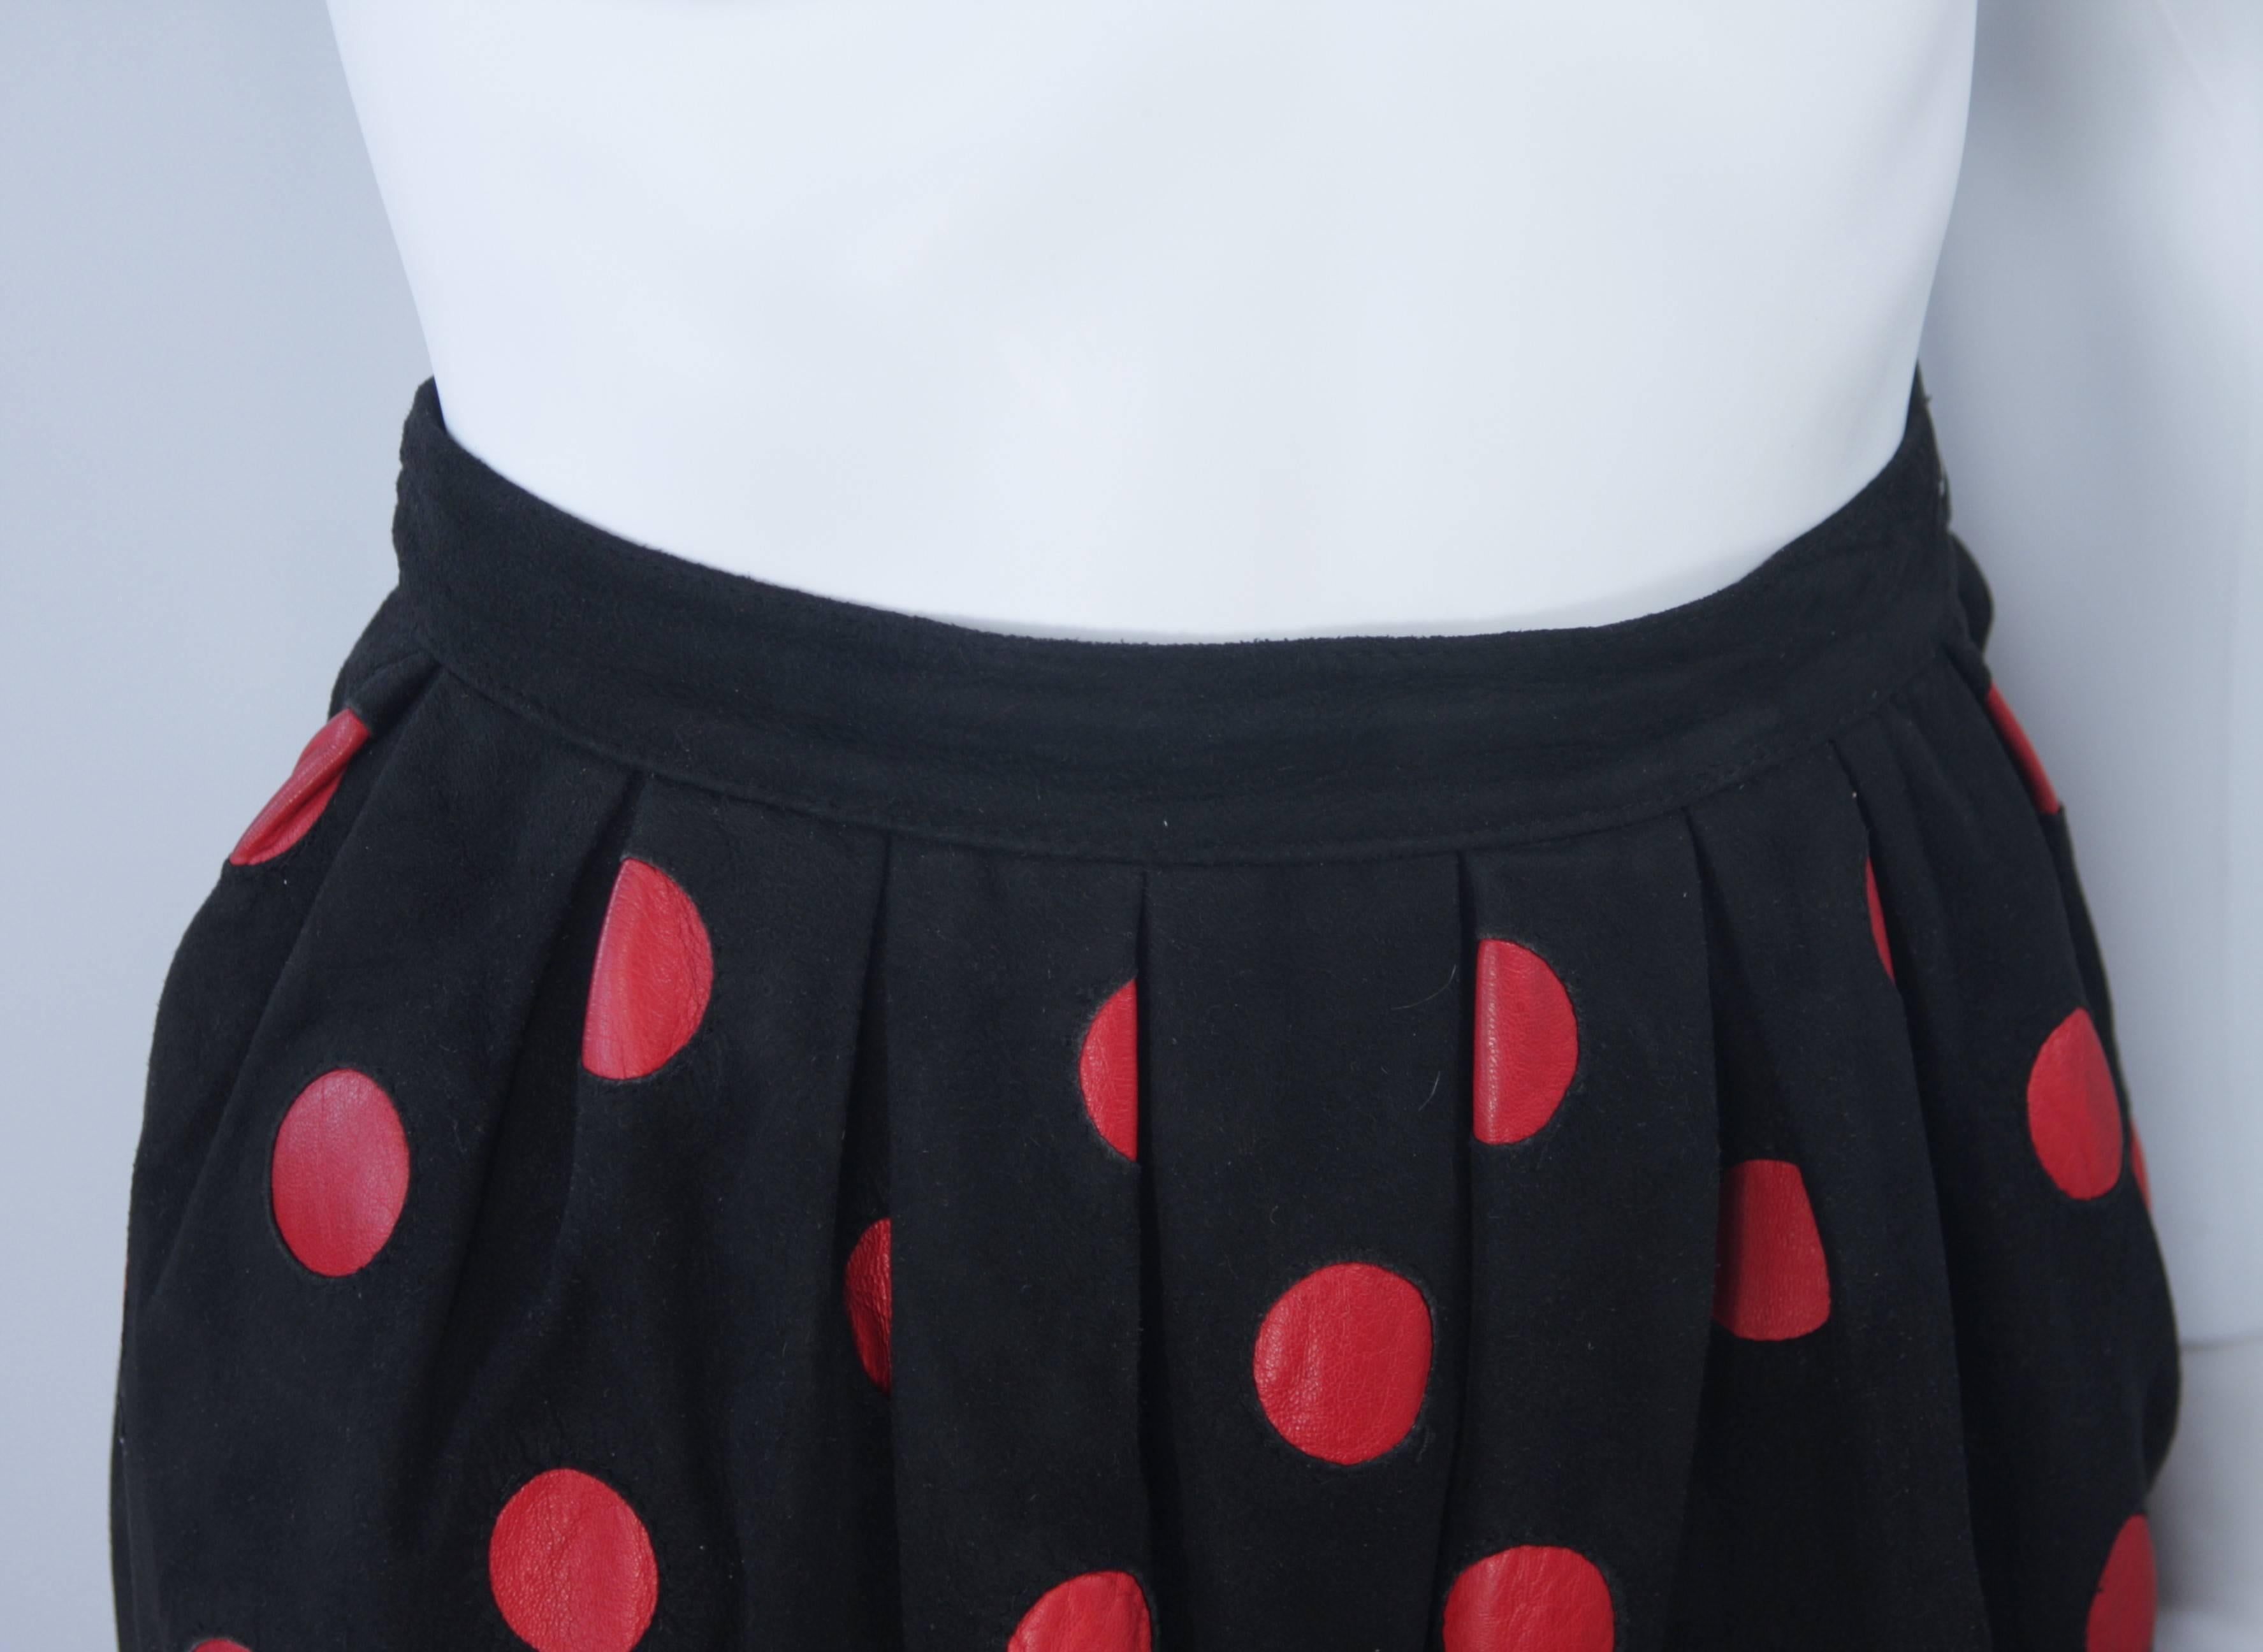 VALENTINO Black Suede Skirt with Red Leather Polka Dots Size 4-6 In Excellent Condition For Sale In Los Angeles, CA